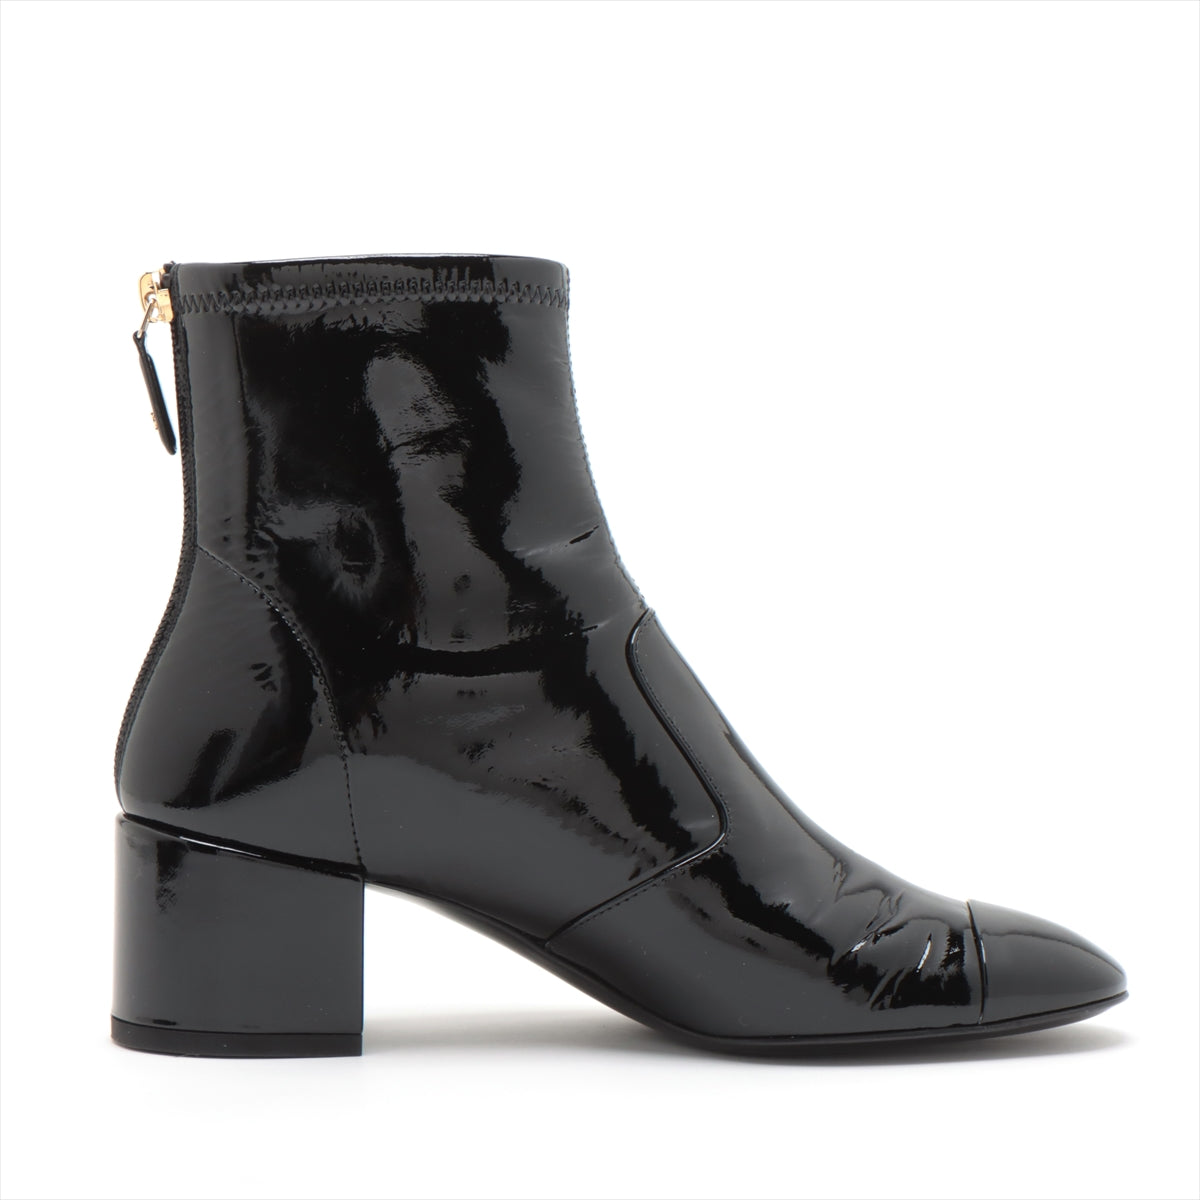 Chanel Coco Mark 22C Patent Leather Short Boots 37 Ladies' Black G38472 Knit socks included